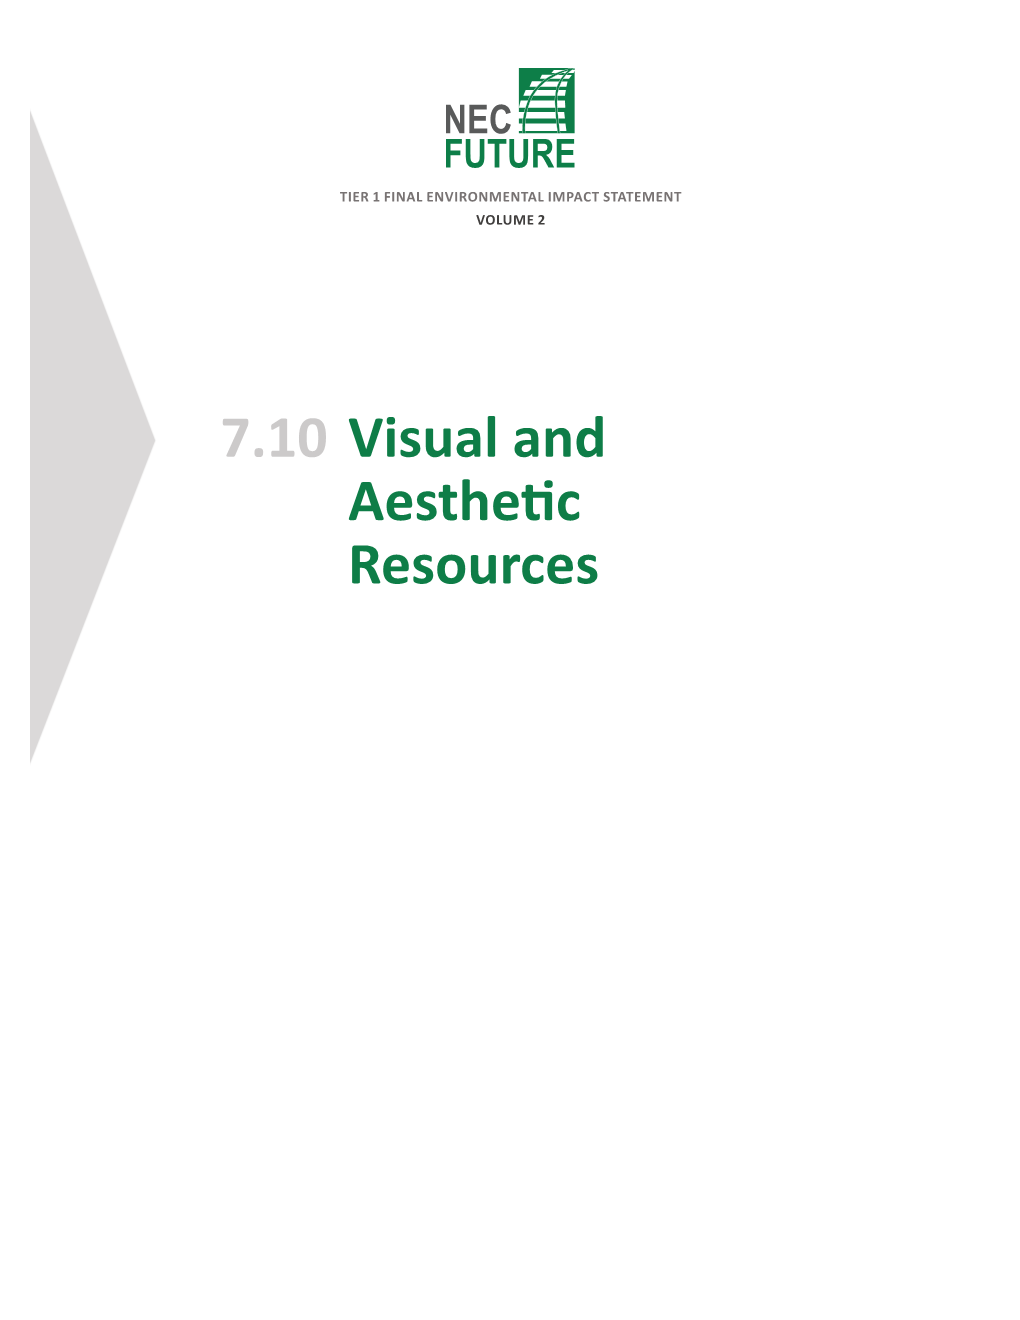 Visual and Aesthetic Resources